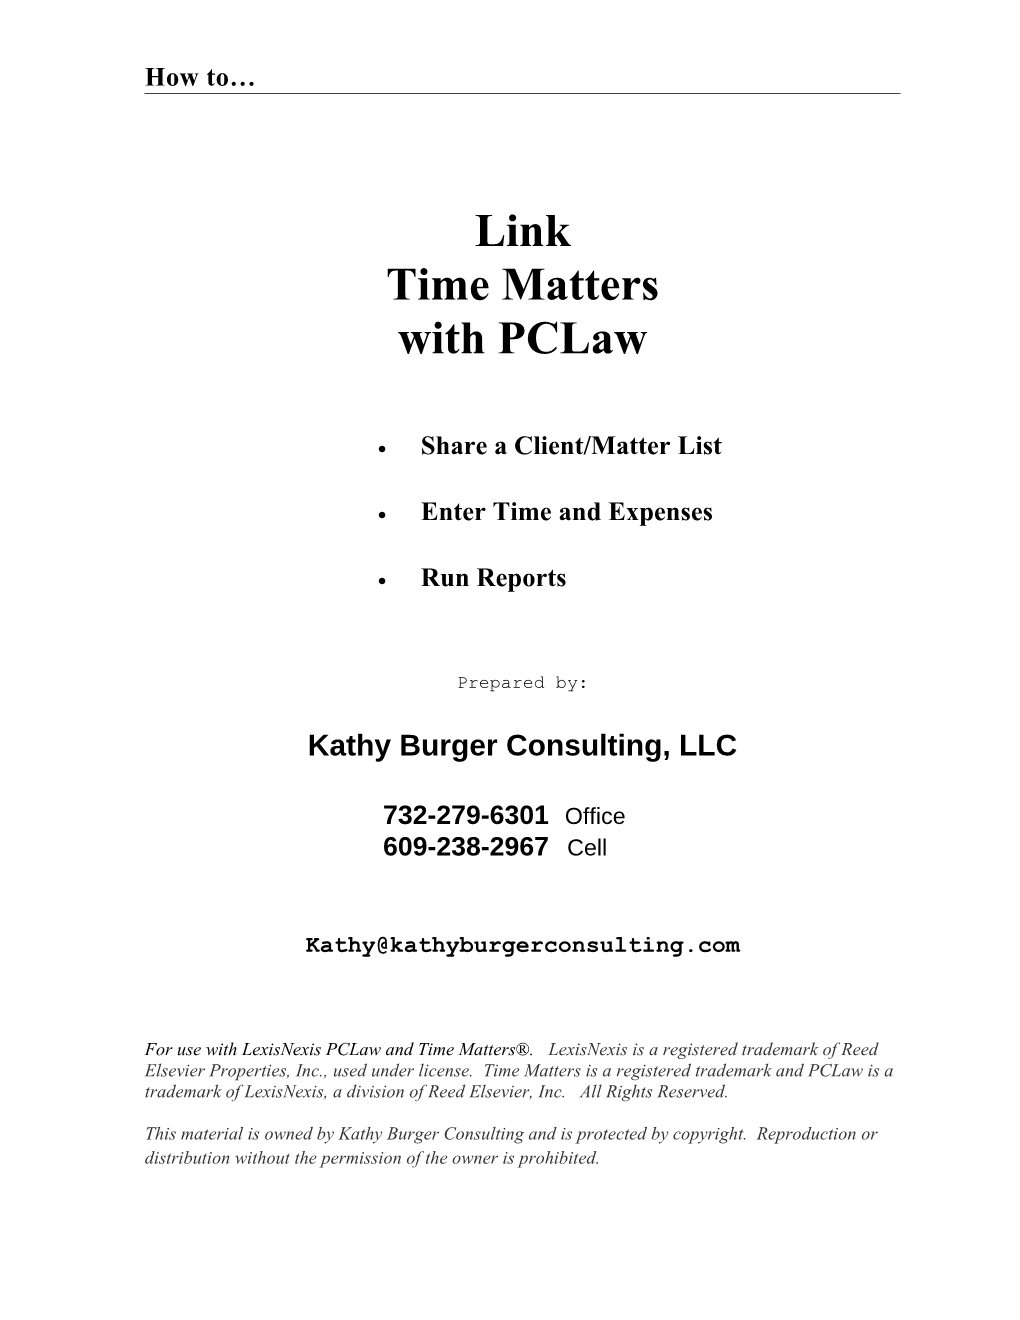 Linking Time Matter with Pclaw